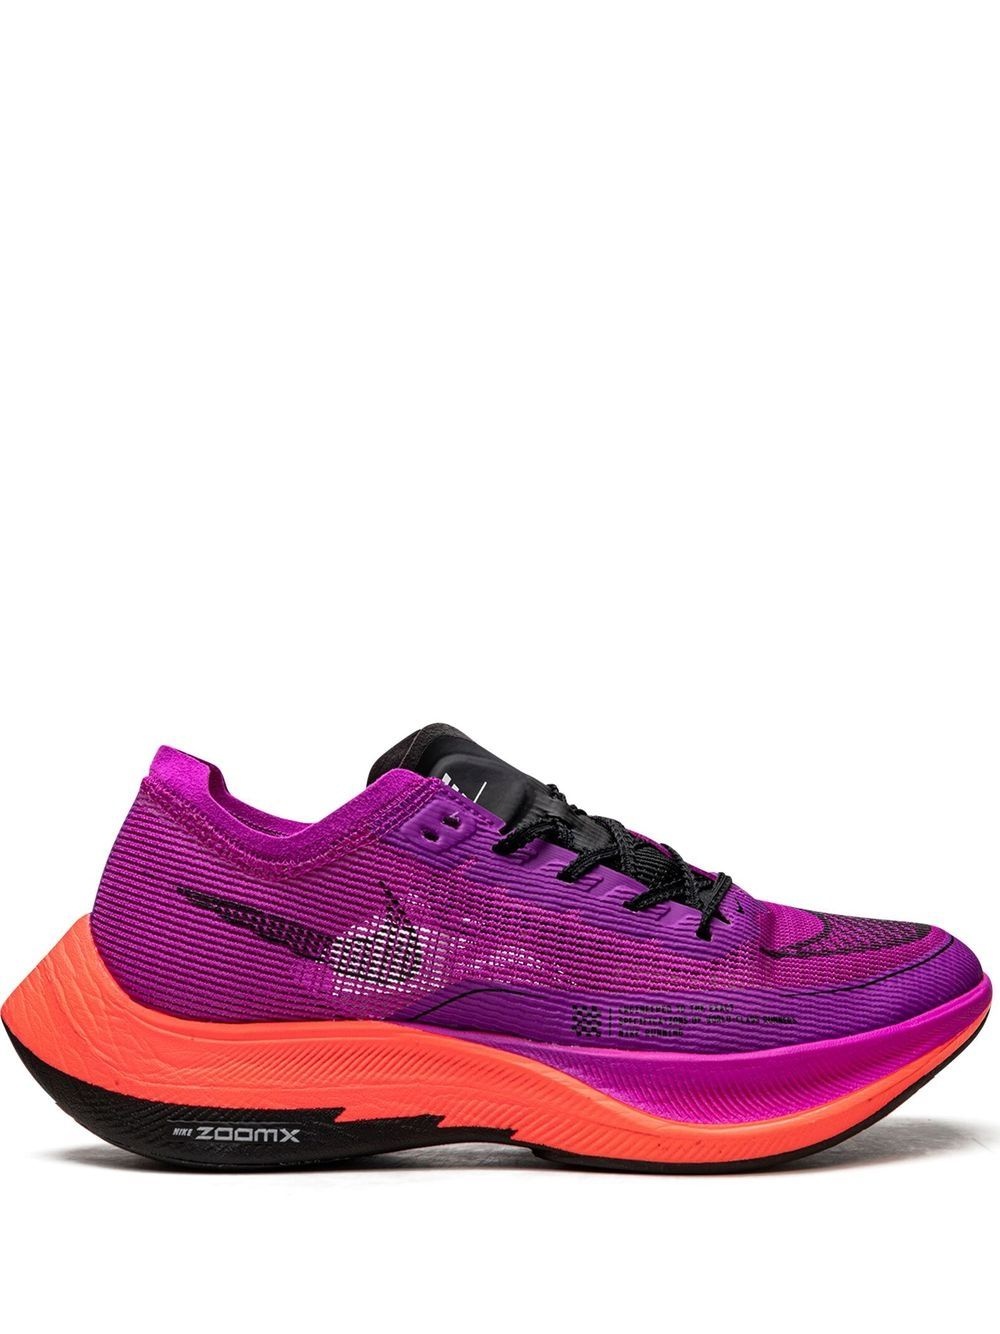 ZoomX Vaporfly Next % 2 "Hyper Violet" sneakers - 1